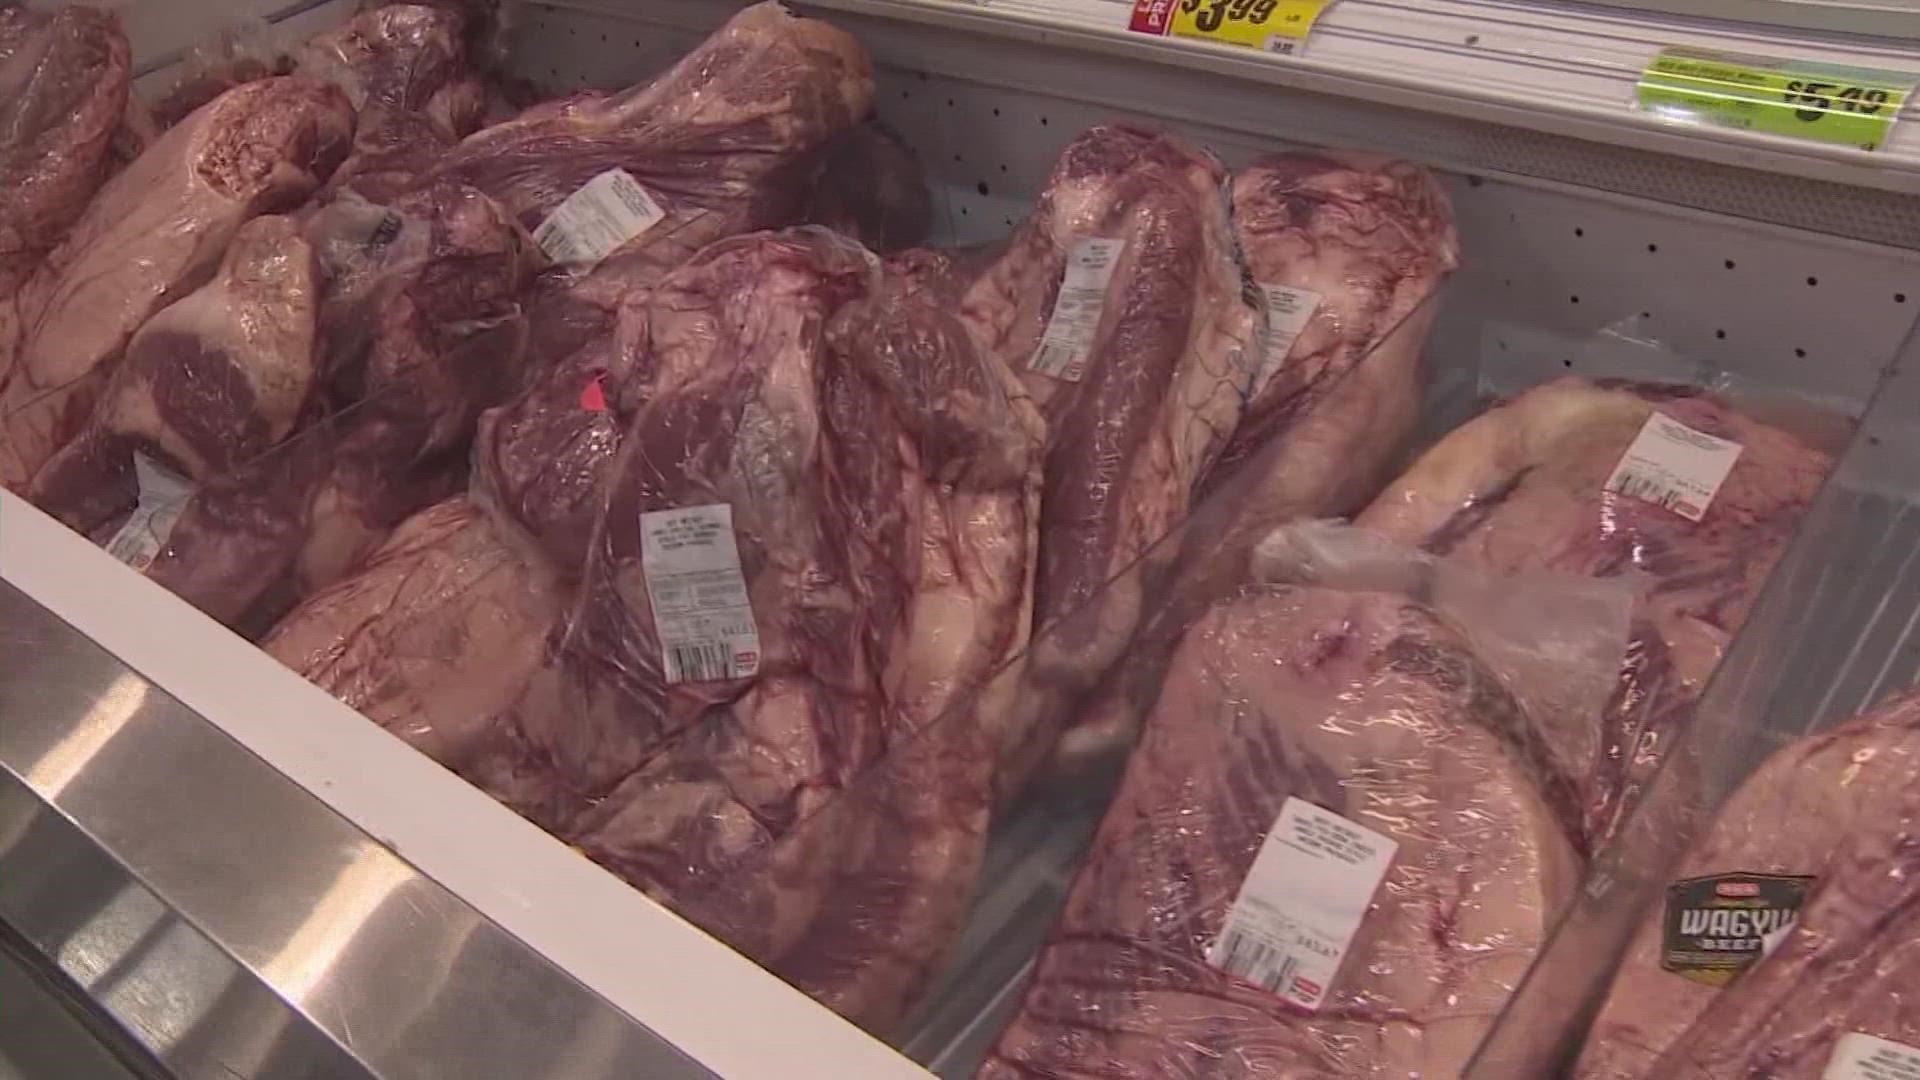 Inflation is driving up meat prices. KHOU 11 reporter Melissa Correa has tips on how to keep some money in your wallet.